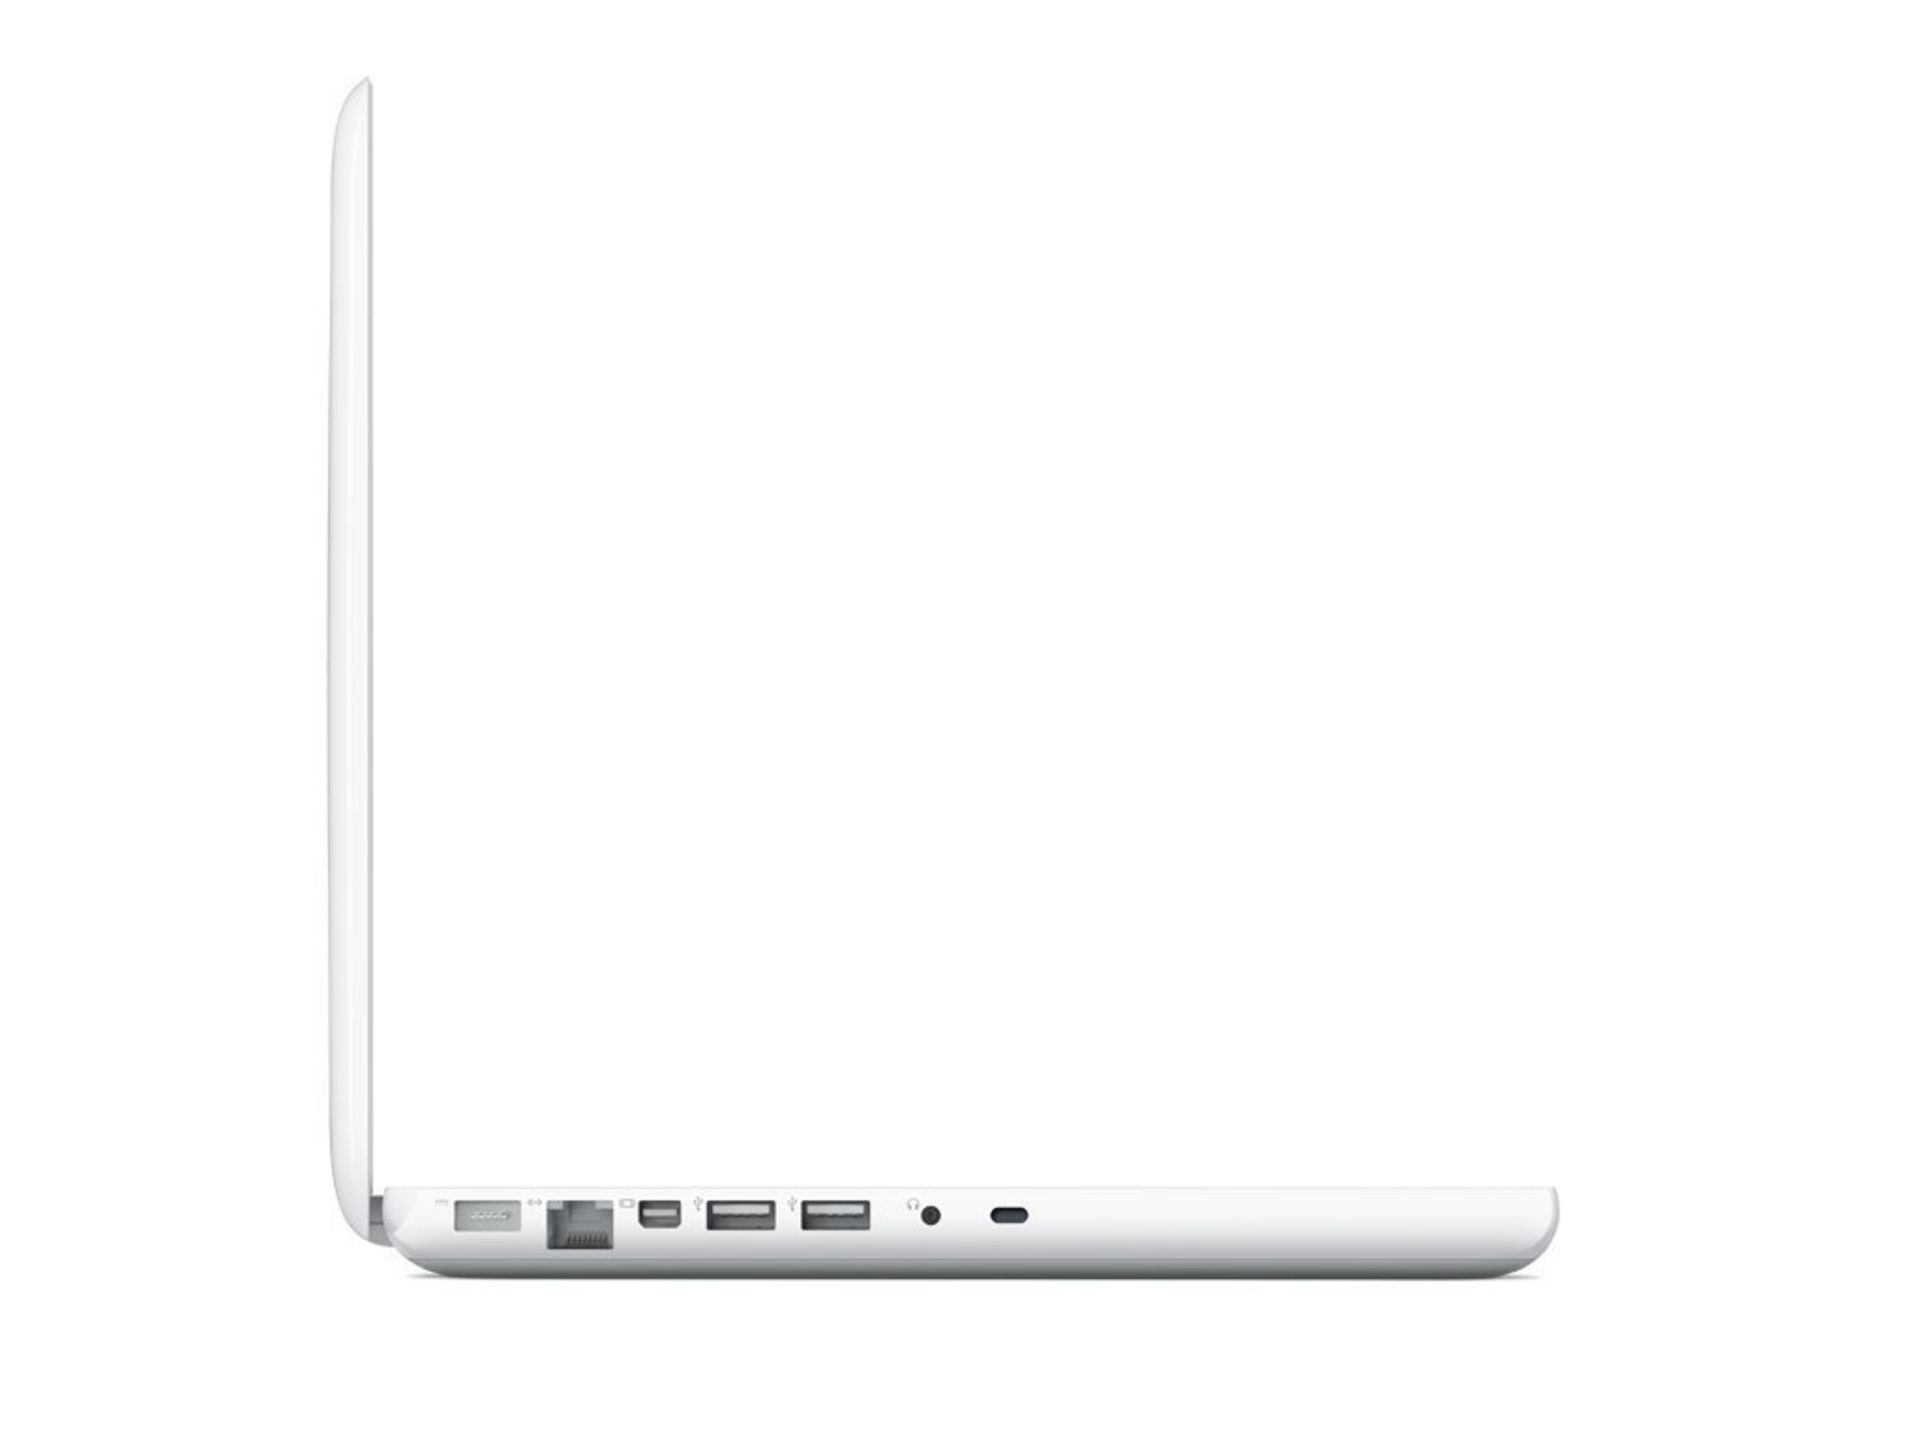 V Grade B Apple Macbook 13.3" Laptop - Core 2 Duo - 2.4 GHz - 2GB RAM - 250GB HDD - Includes Power - Image 3 of 3